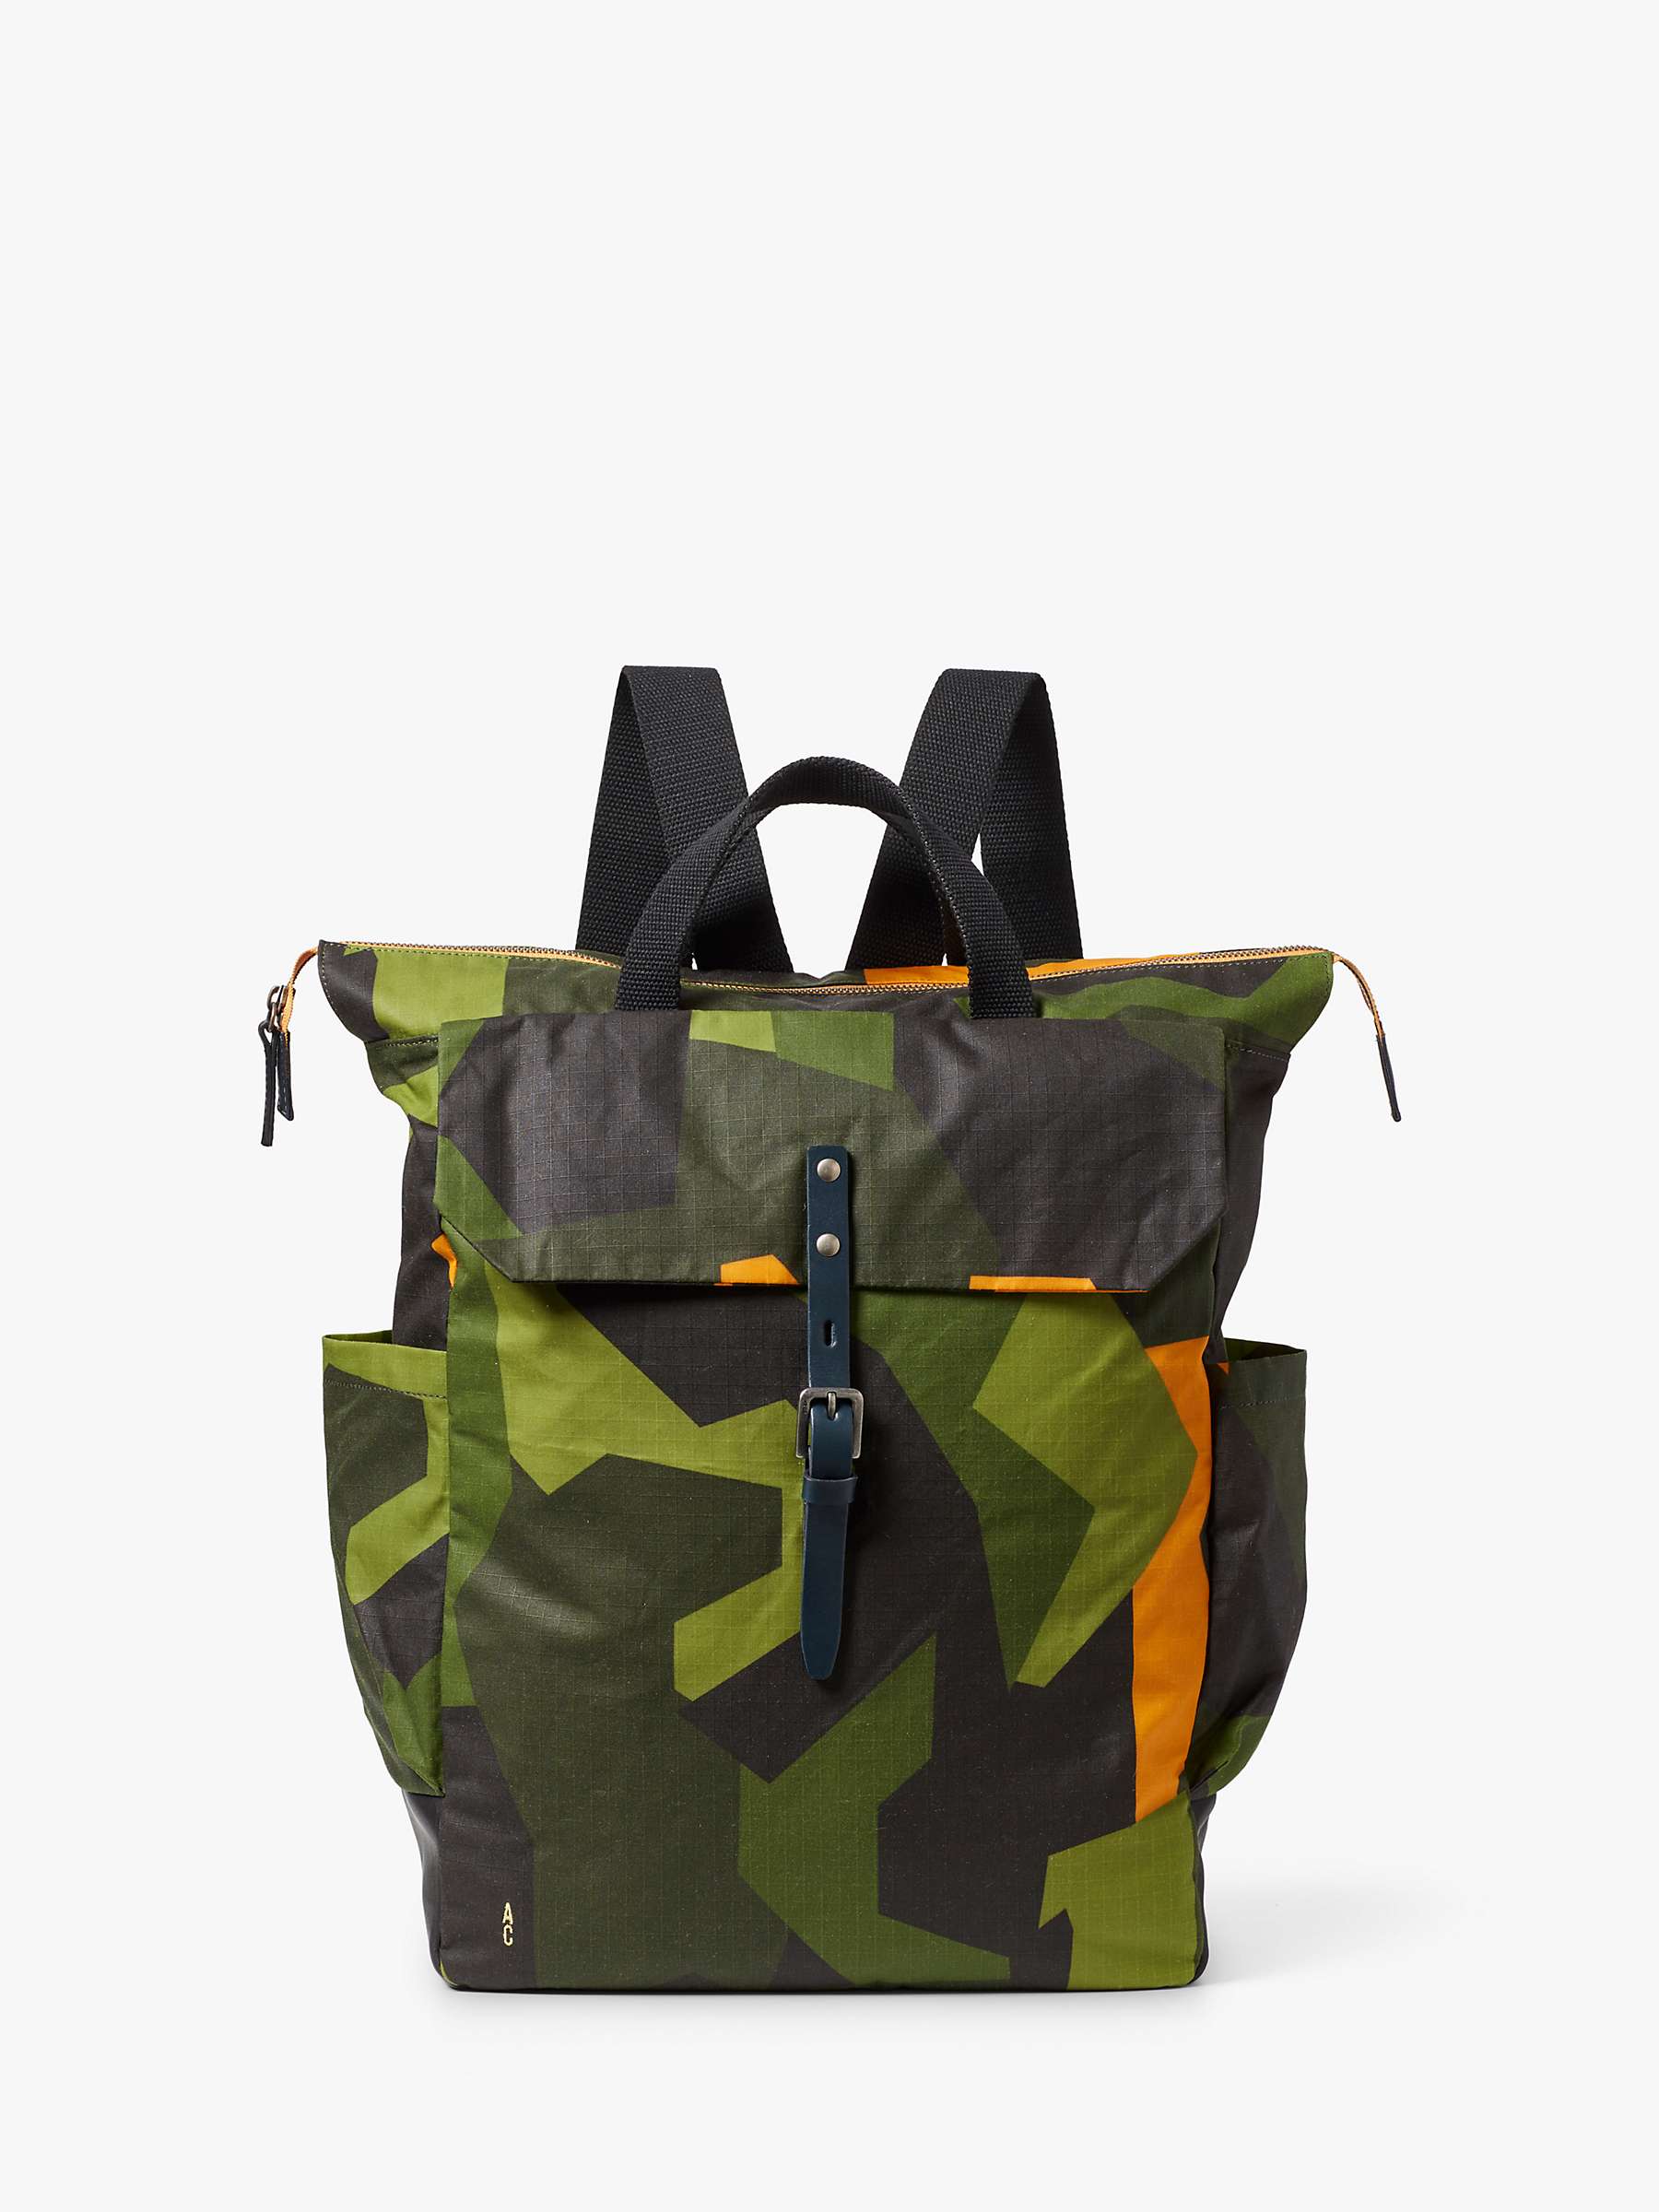 Buy Ally Capellino Fin Camo Waxed Cotton Rucksack, Green/Yellow Online at johnlewis.com